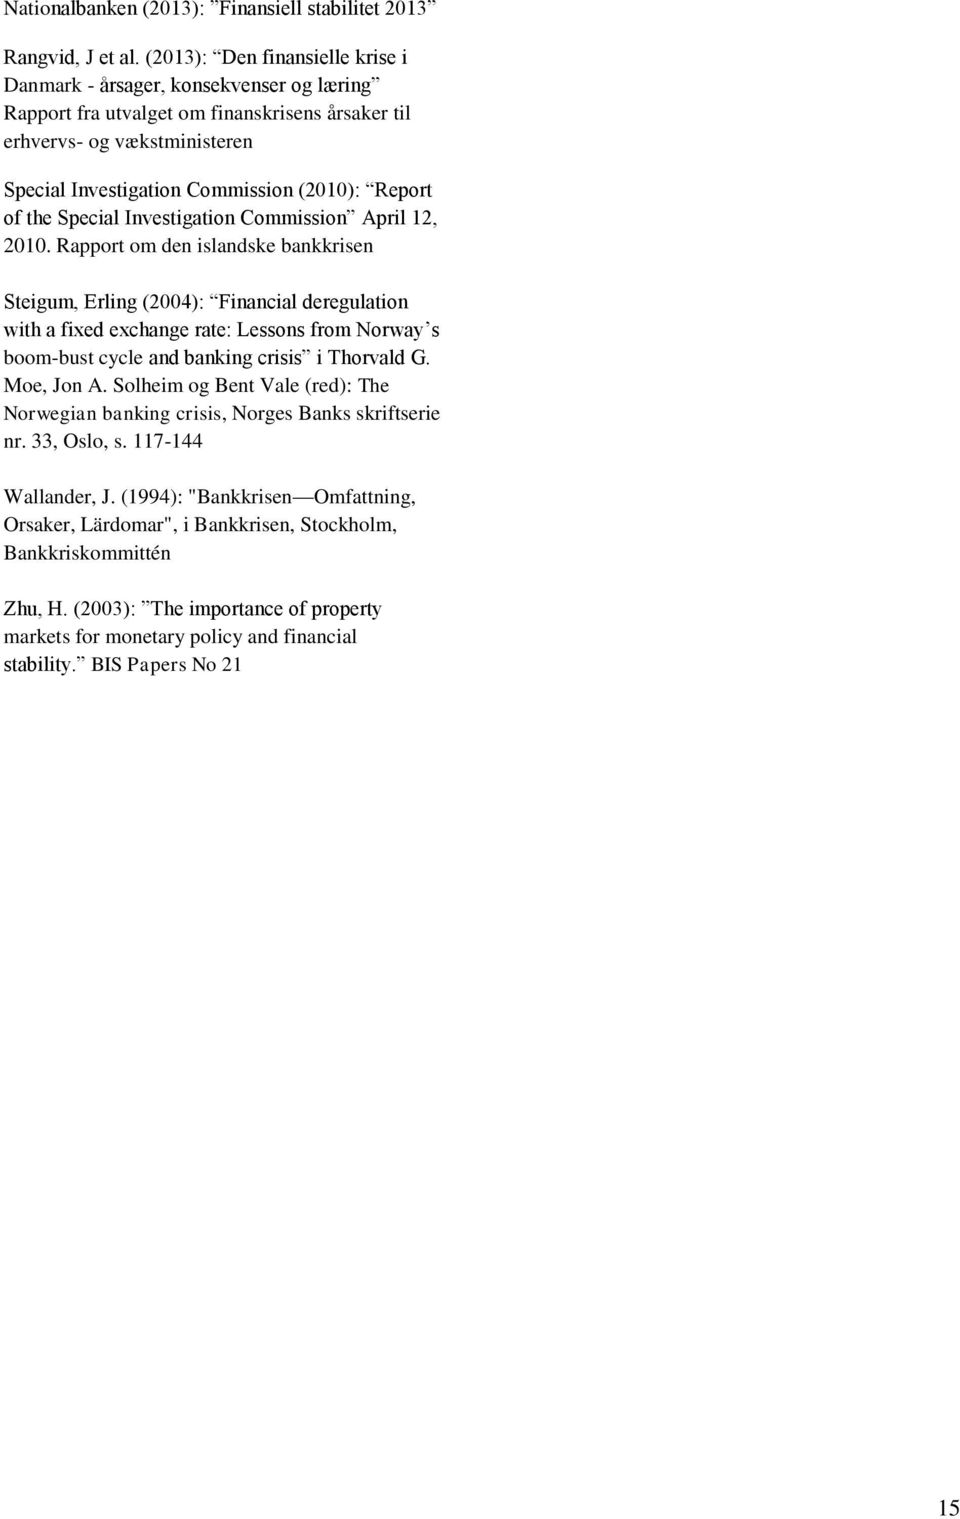 Report of the Special Investigation Commission April 12, 2010.